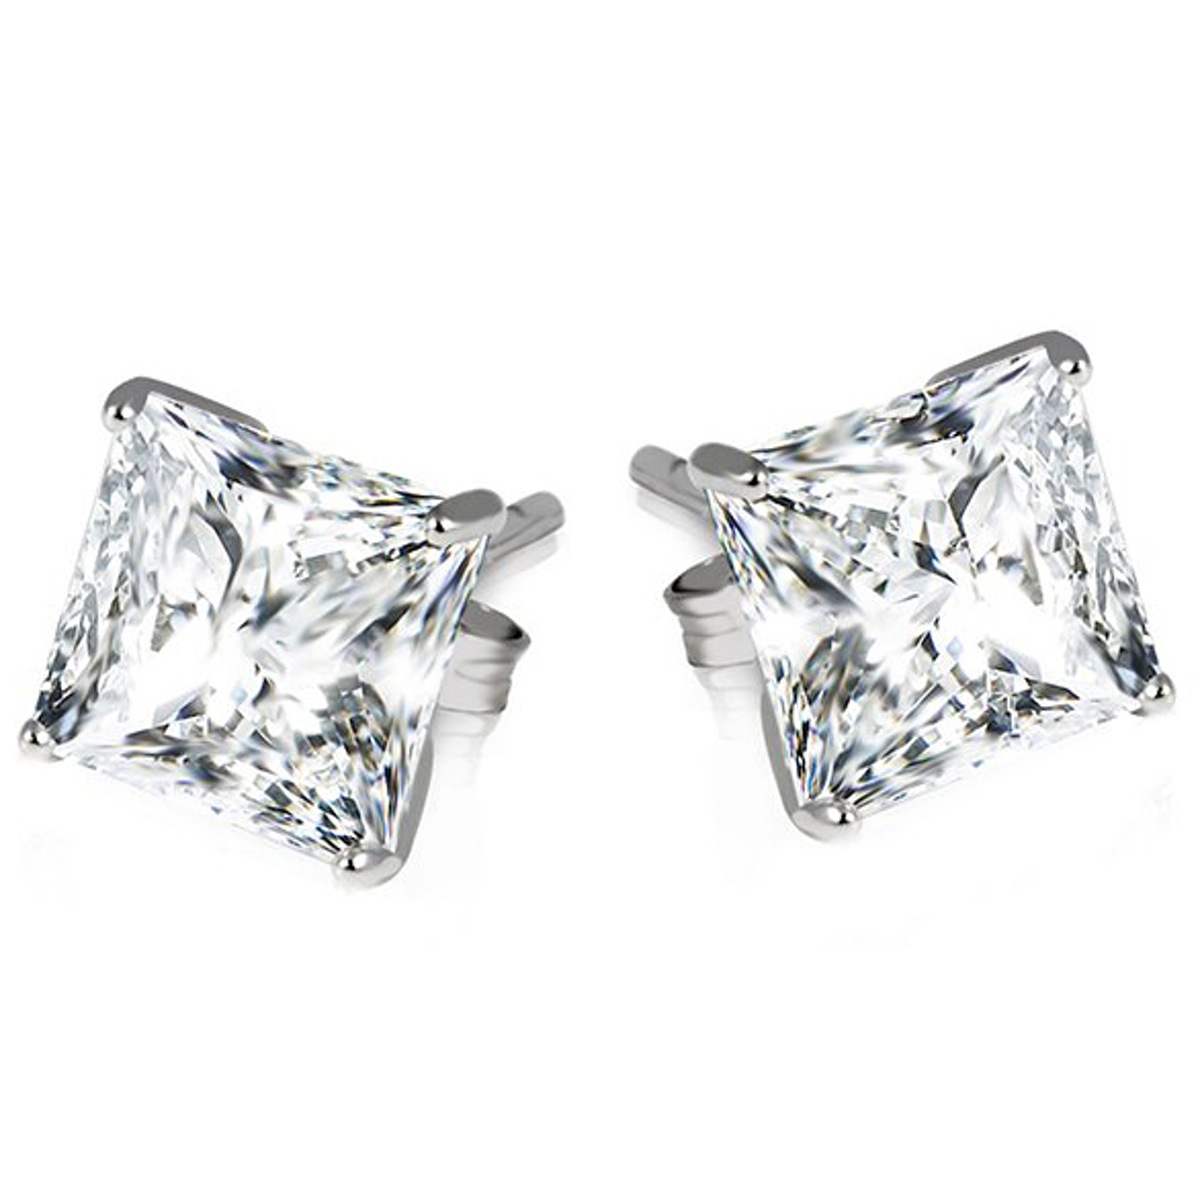 2ct or 8ct Sterling Silver Princess Cut Earrings – FREE – Just pay shipping!